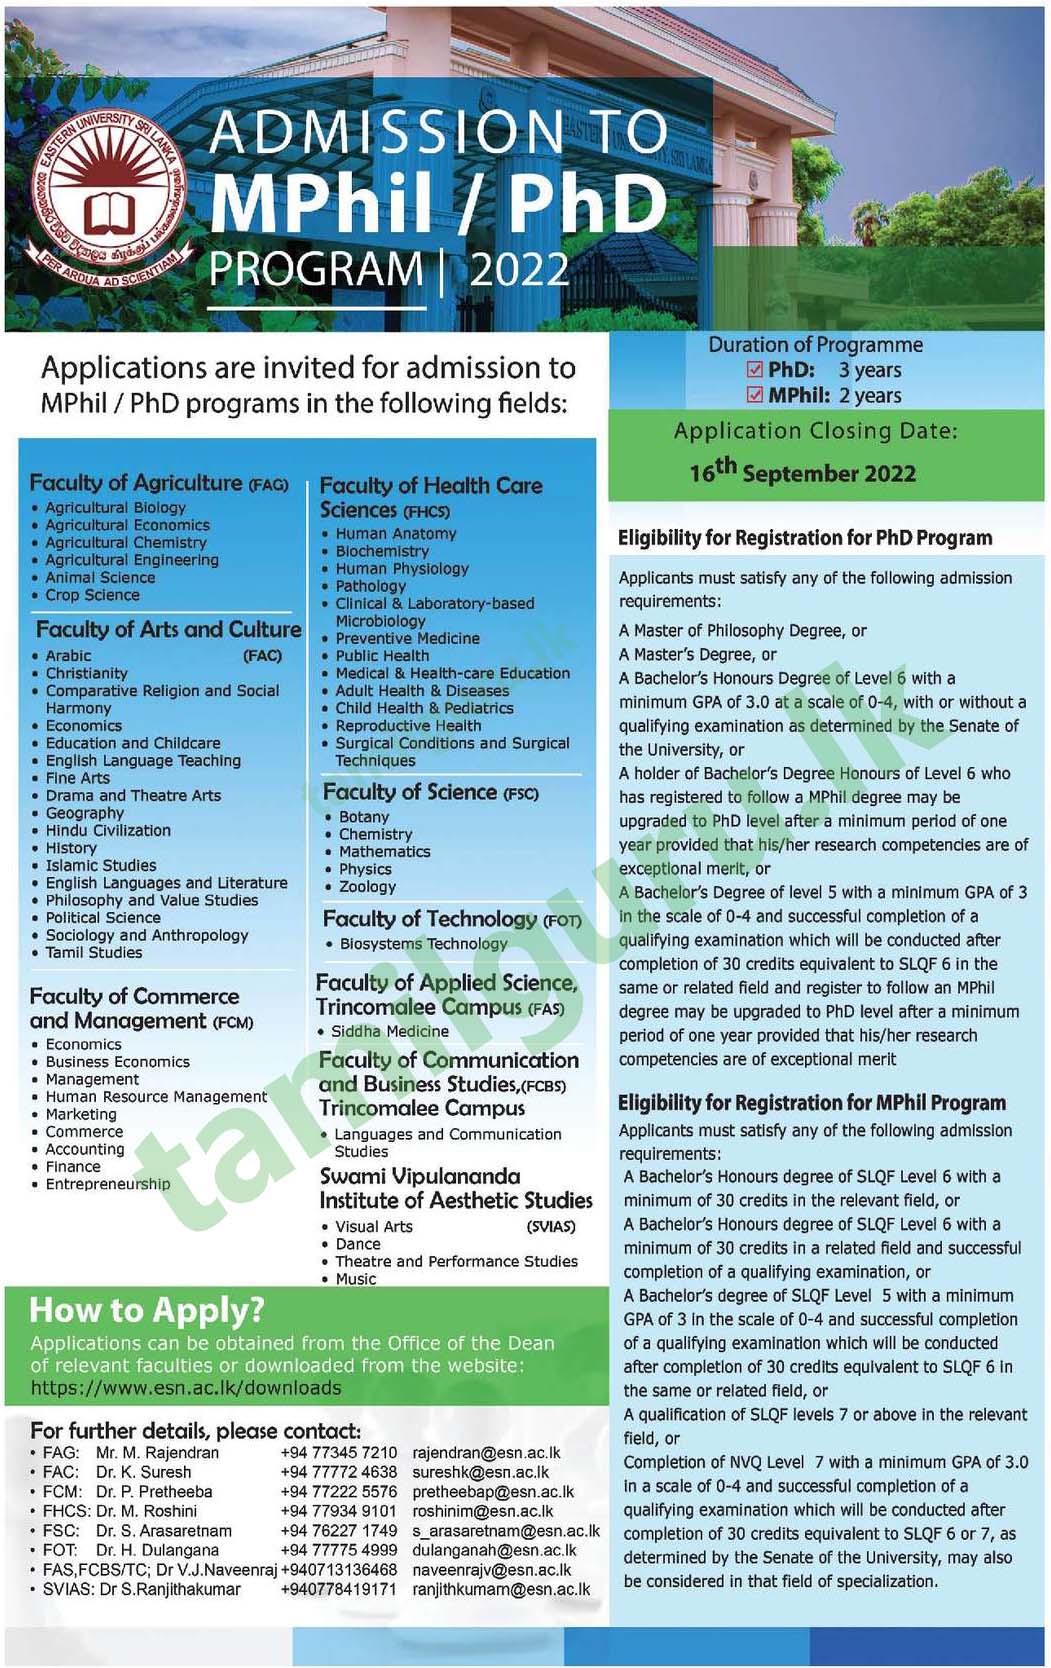 Calling Applications for Admission to MPhil & PhD Programs (2022 Intake) from Eastern University, Sri Lanka (EUSL)